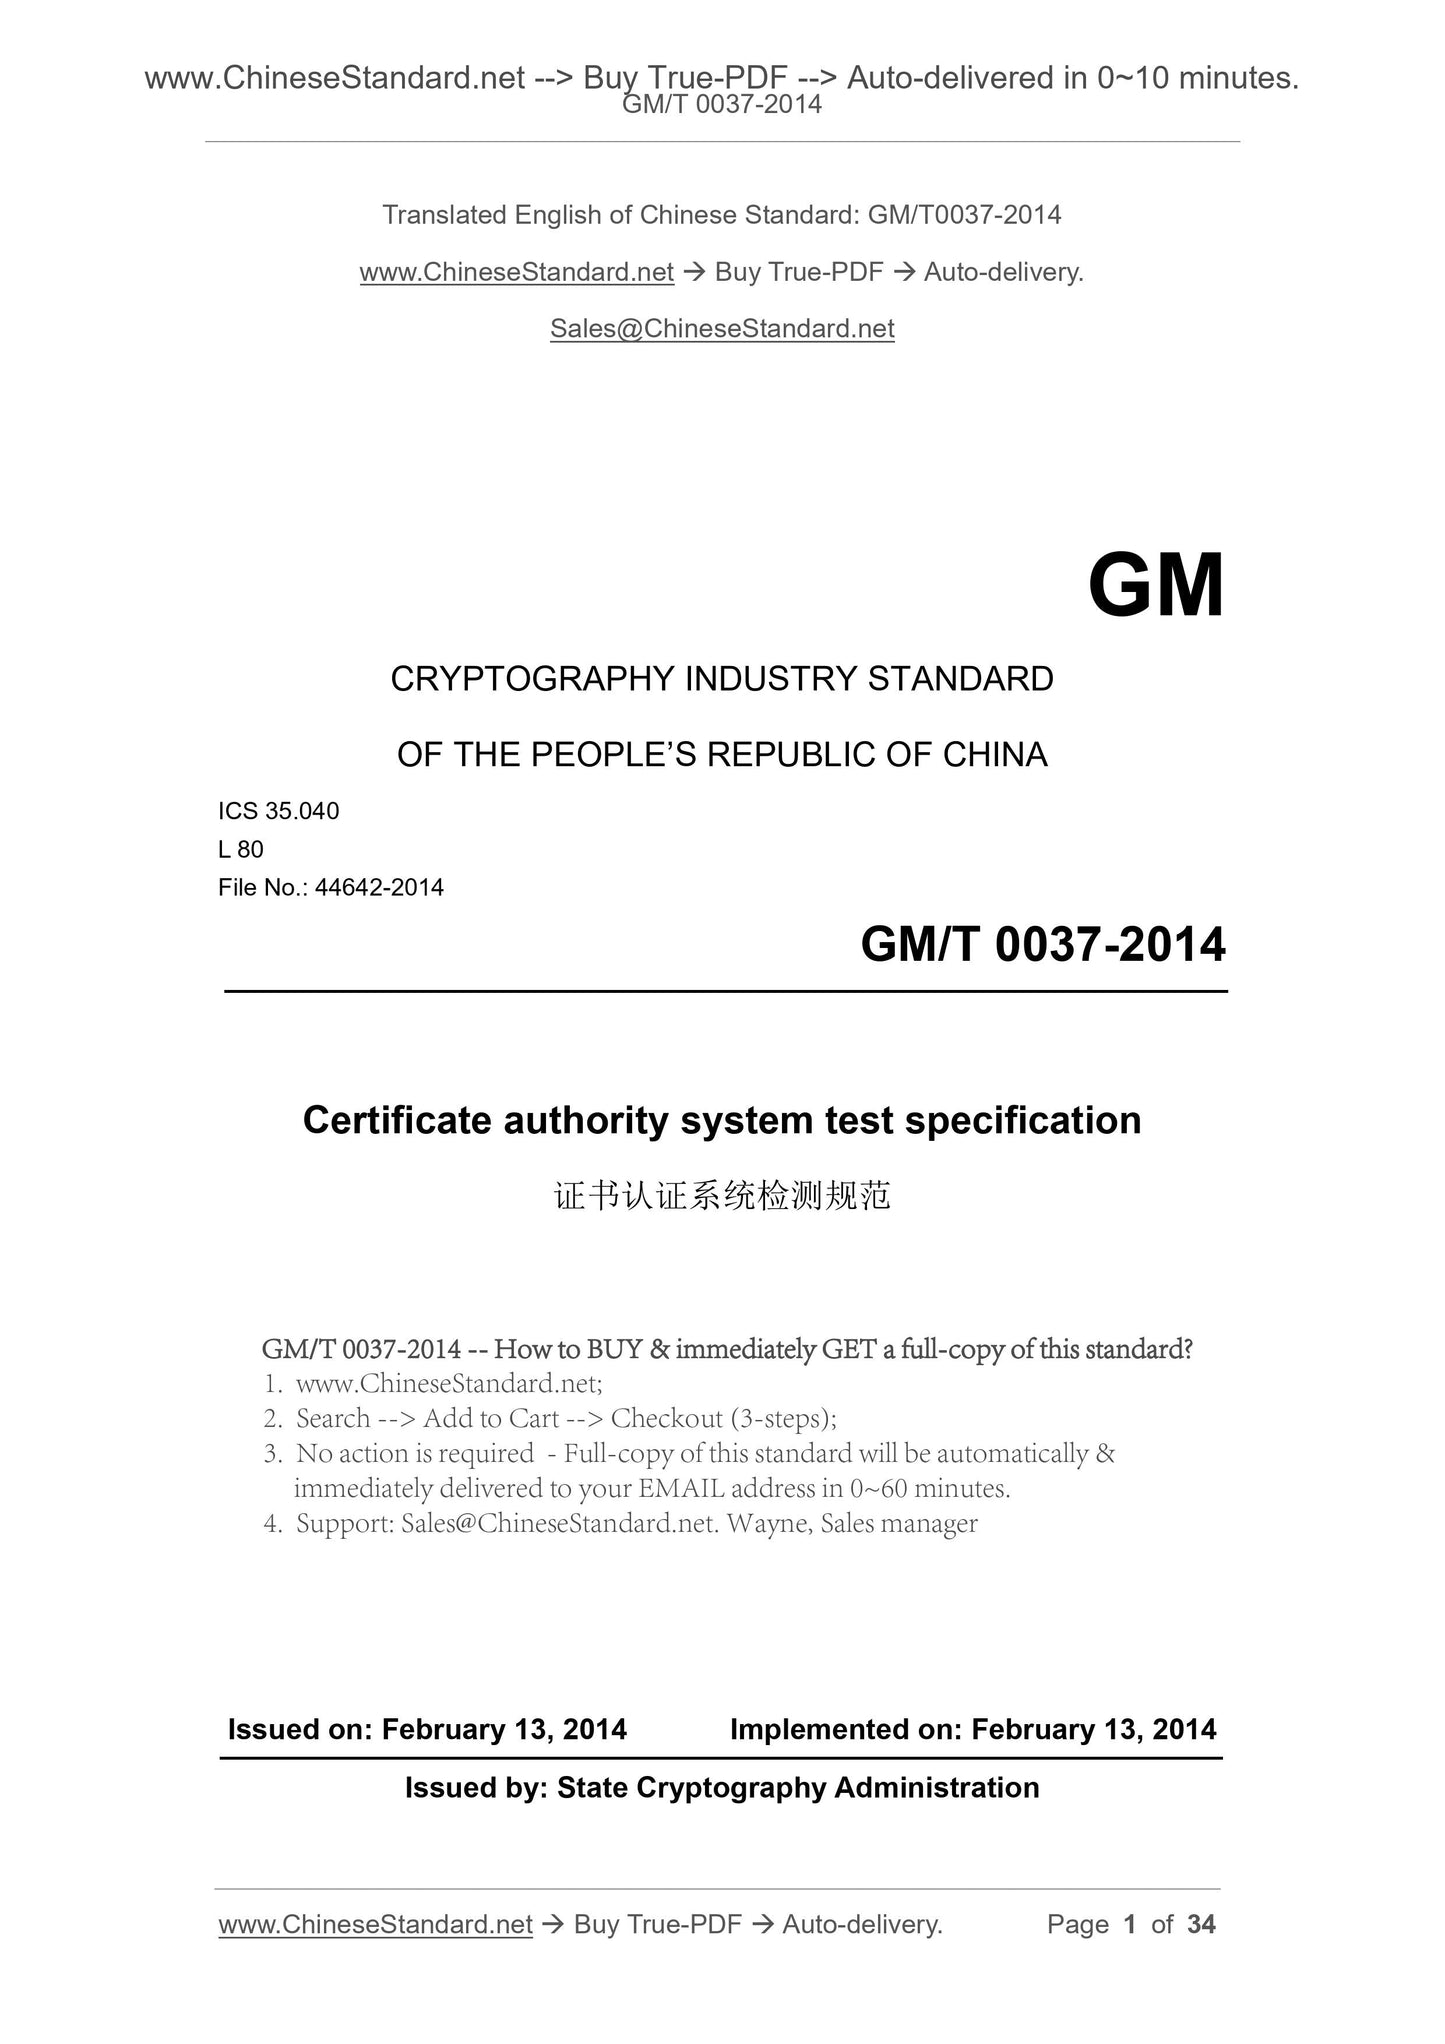 GM/T 0037-2014 Page 1